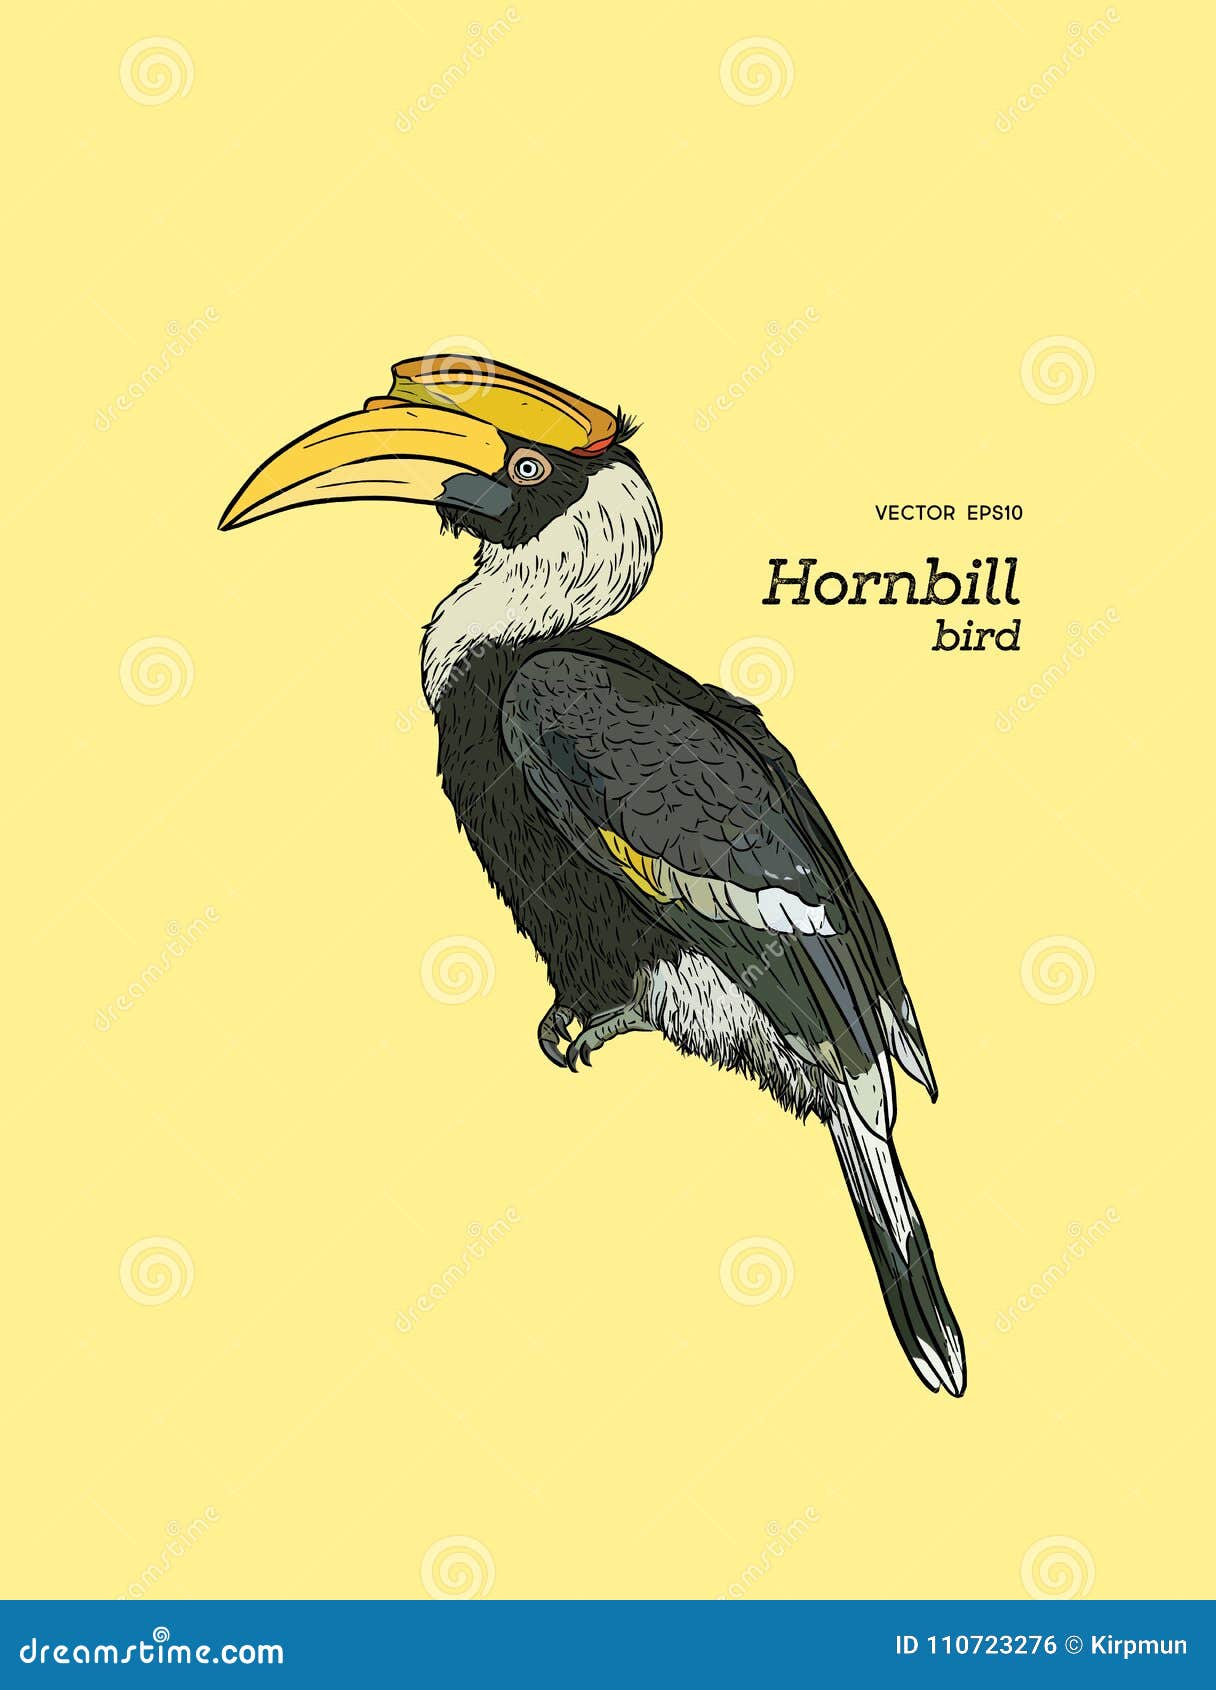 Hornbill Bird with Scenery Drawing/How to Draw Simple Bird with Scenery and  Colour Easy Step by Step - YouTube